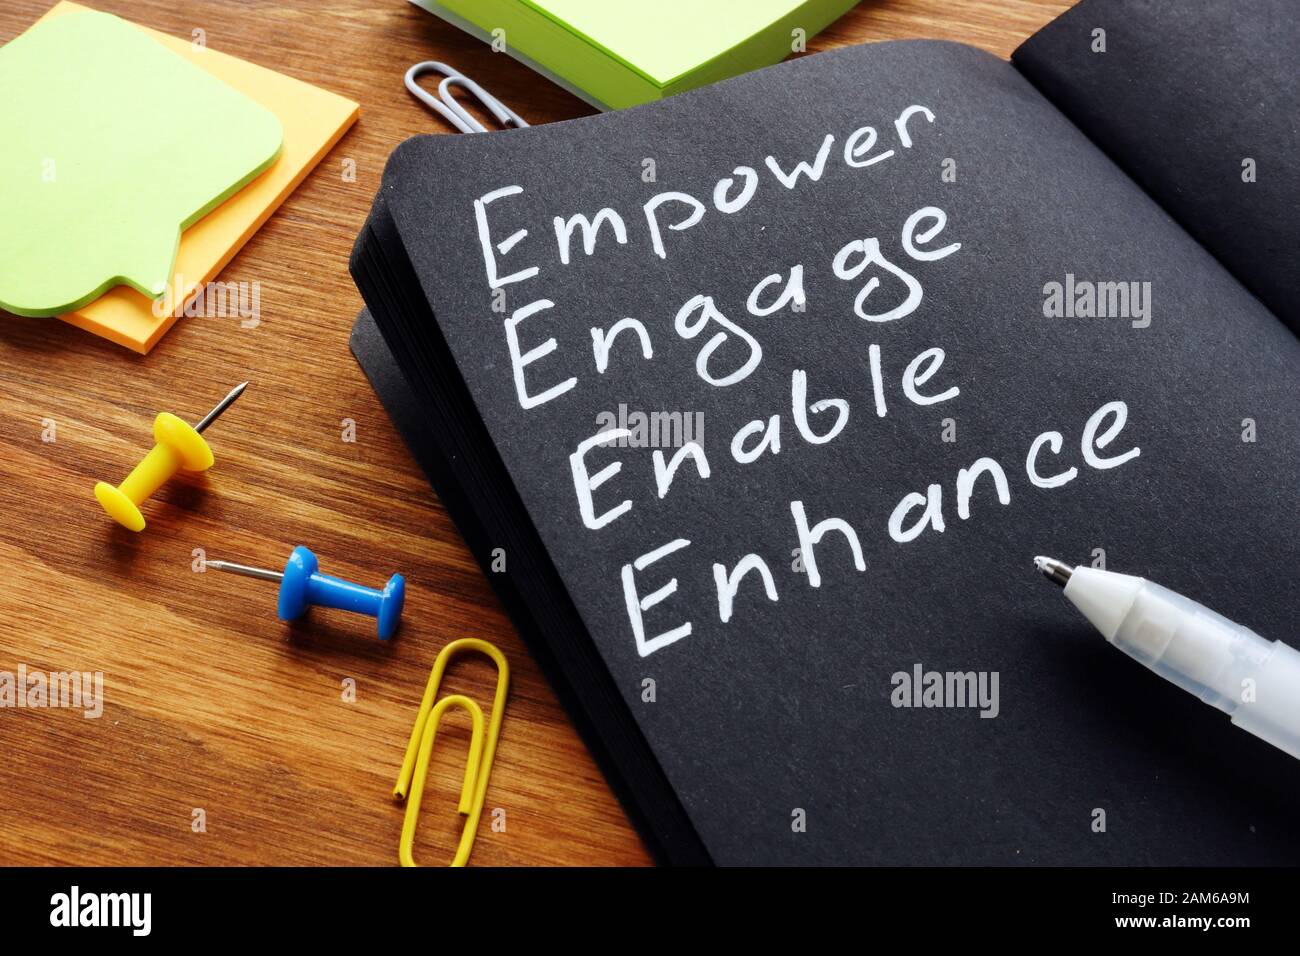 Empower engage enable enhance words written in the notepad. Stock Photo